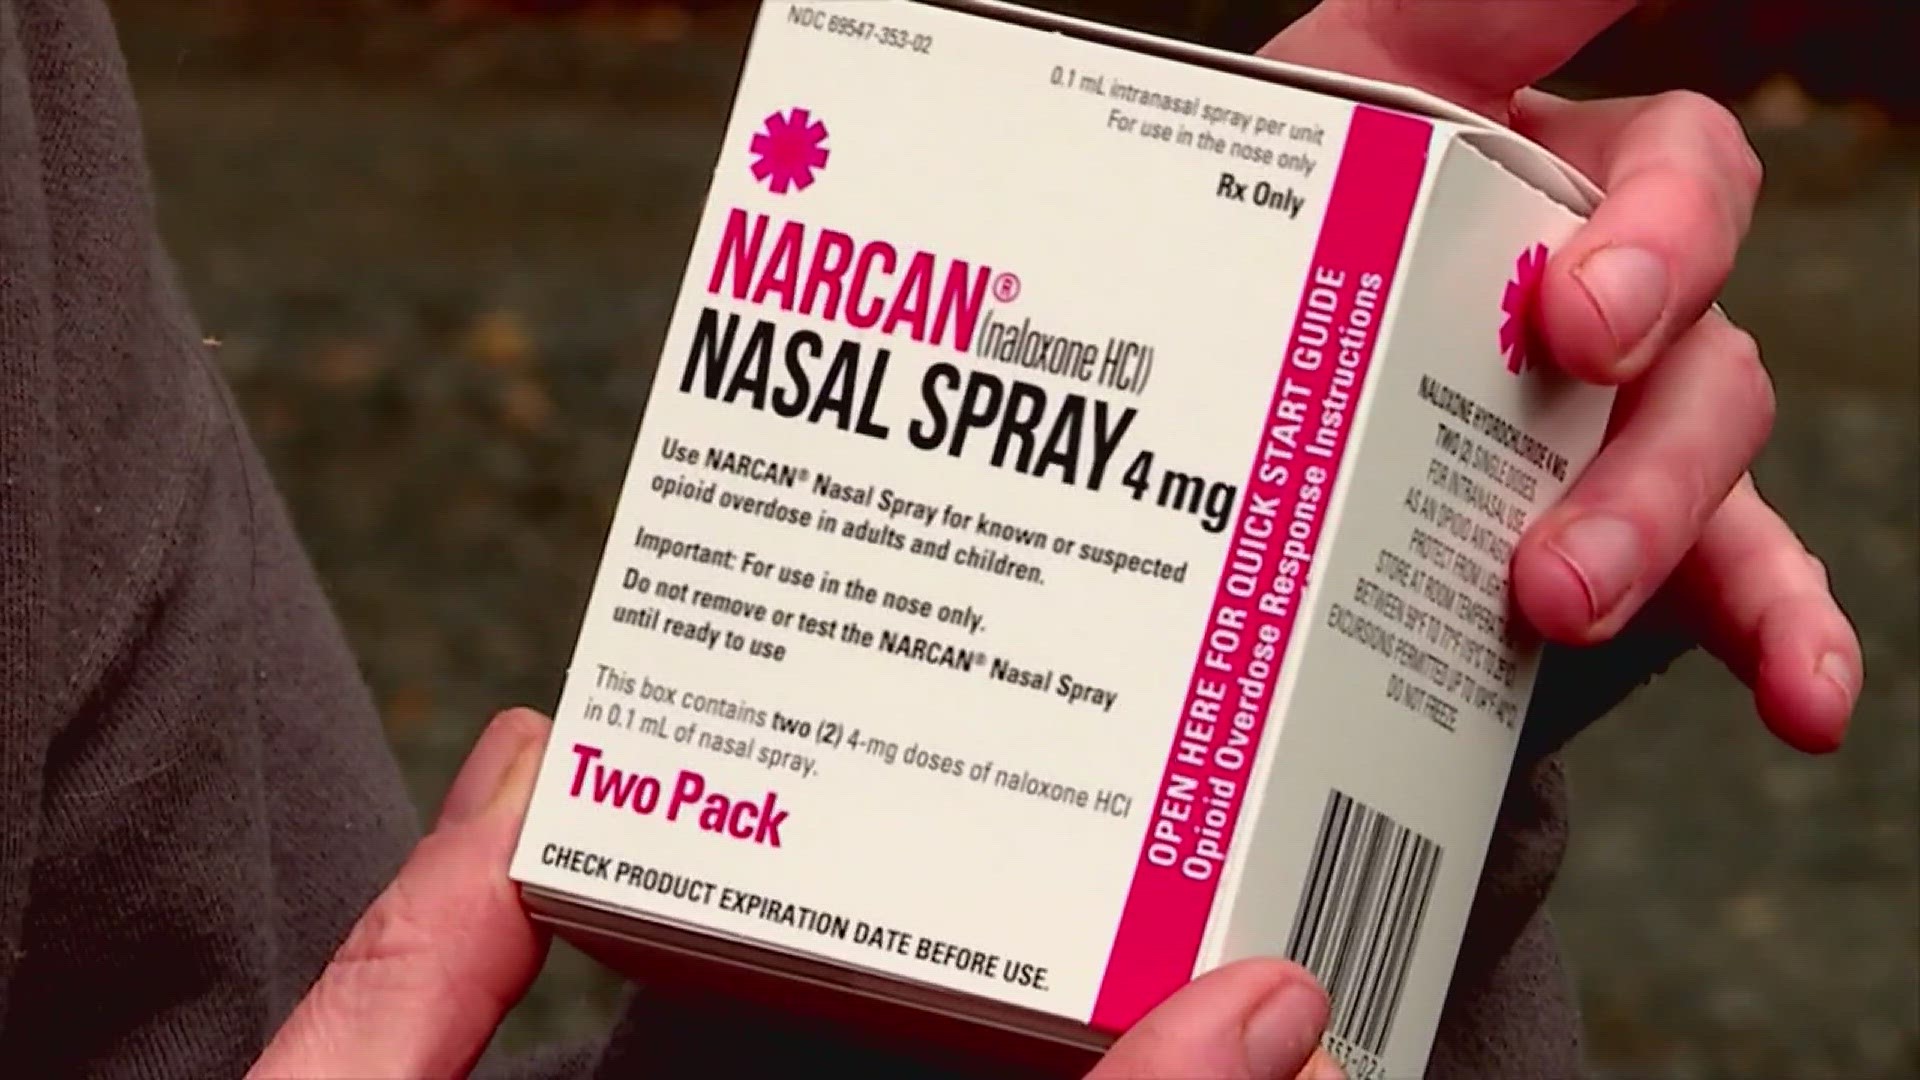 All it takes is two sprays, but even with Narcan, patients still need EMS.